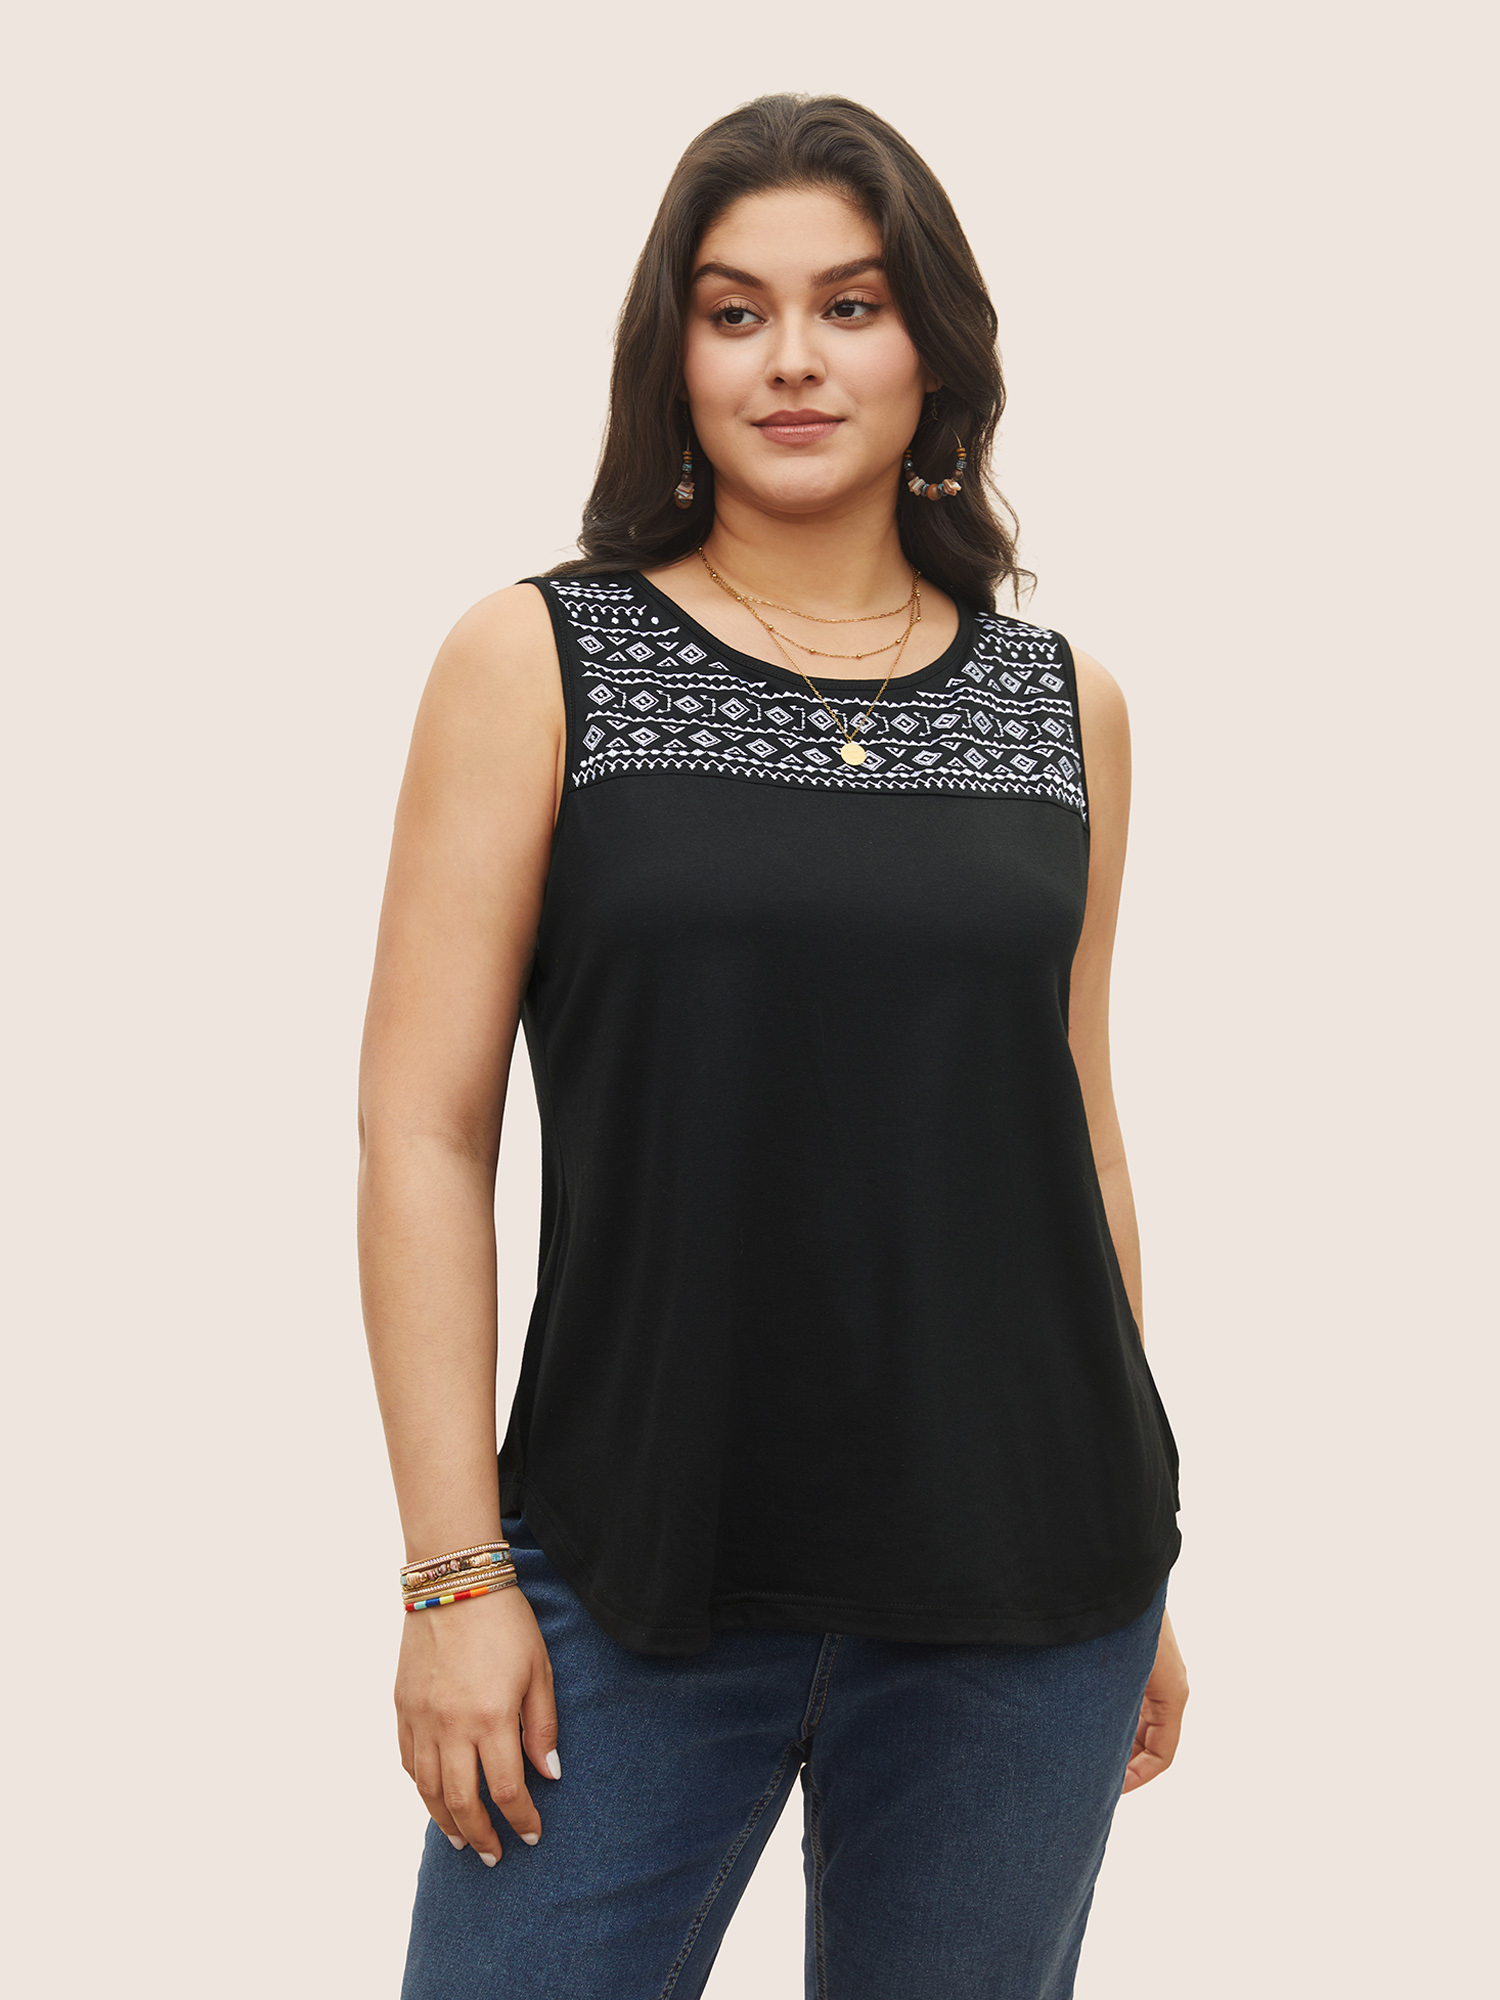 

Plus Size Bandana Geometric Embroidered Tank Top Women Black Resort Embroidered Round Neck Vacation Tank Tops Camis BloomChic